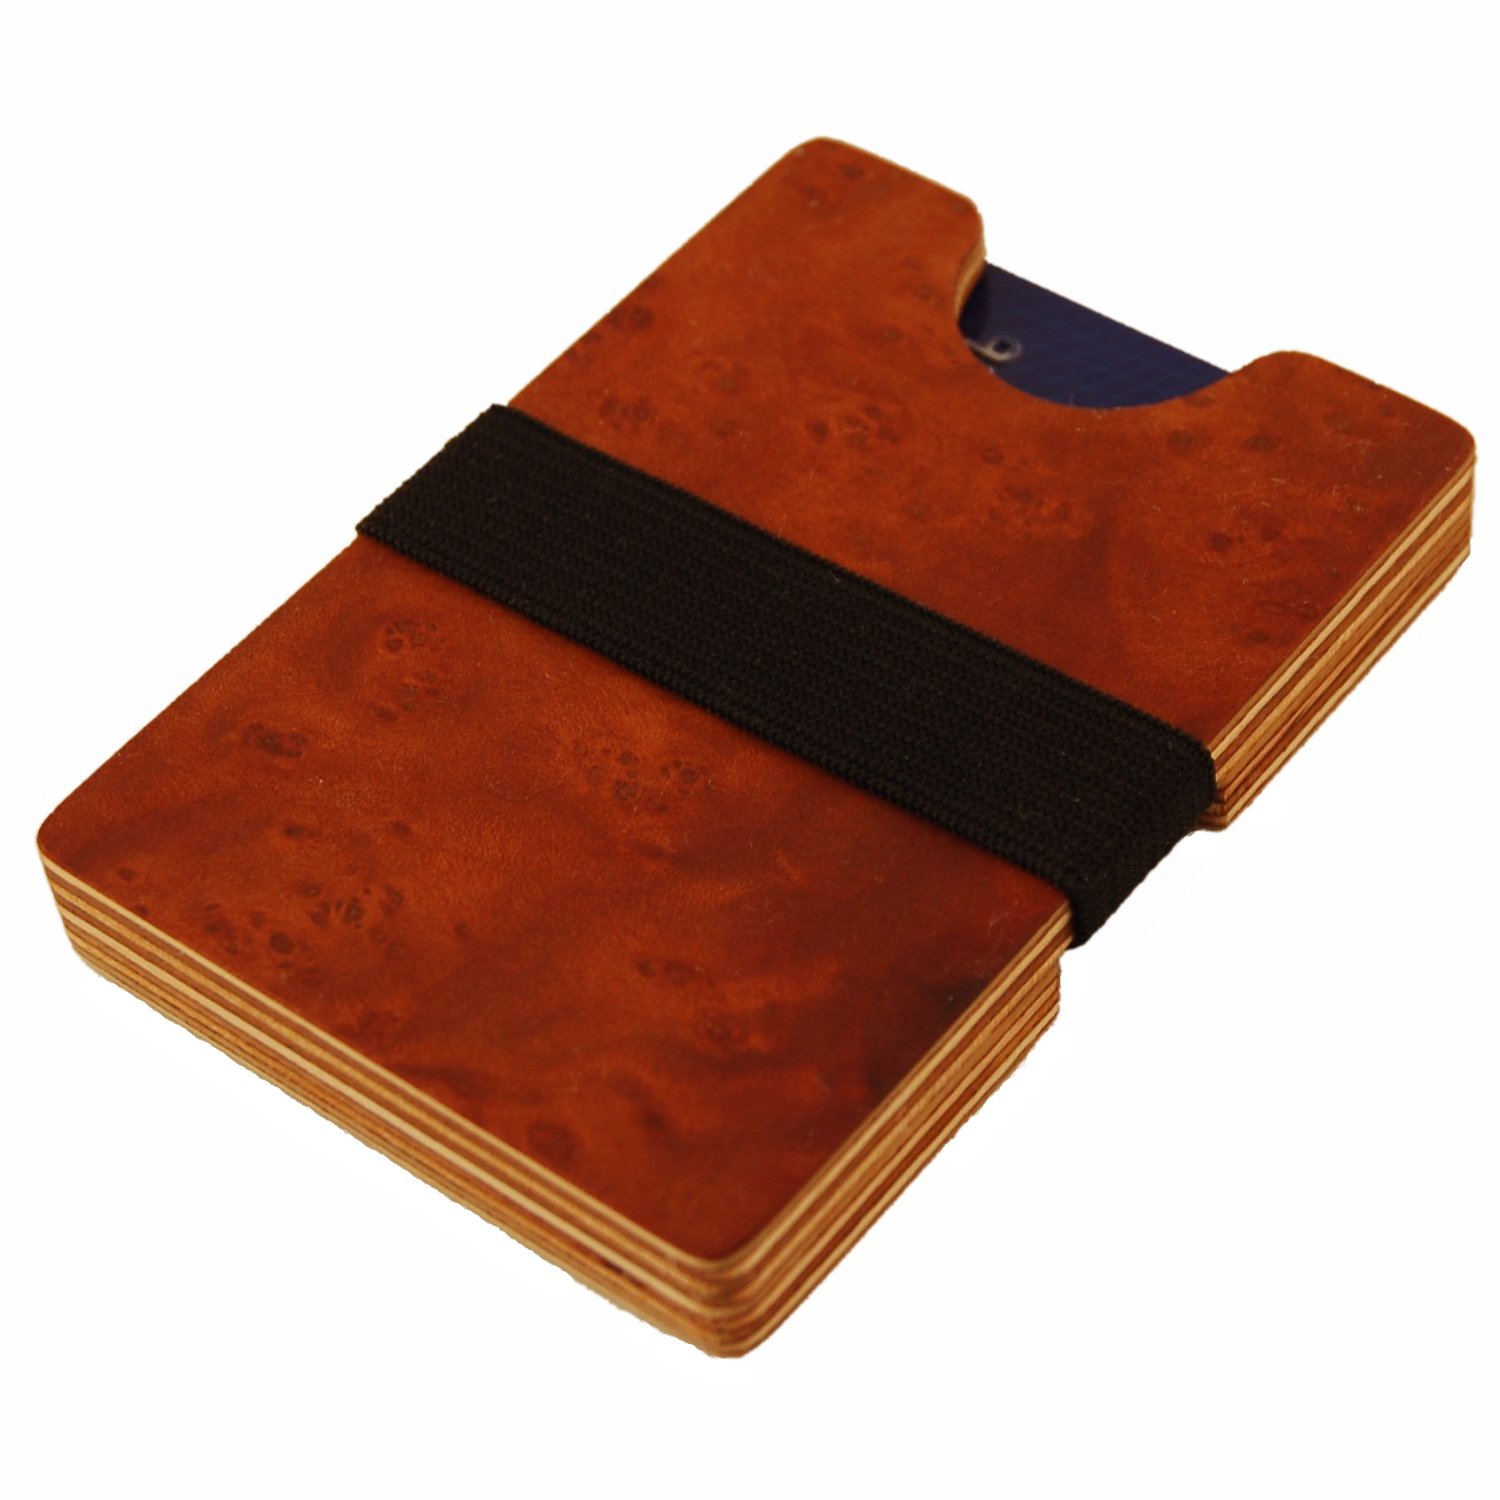 small woodwallet made of vavona wood